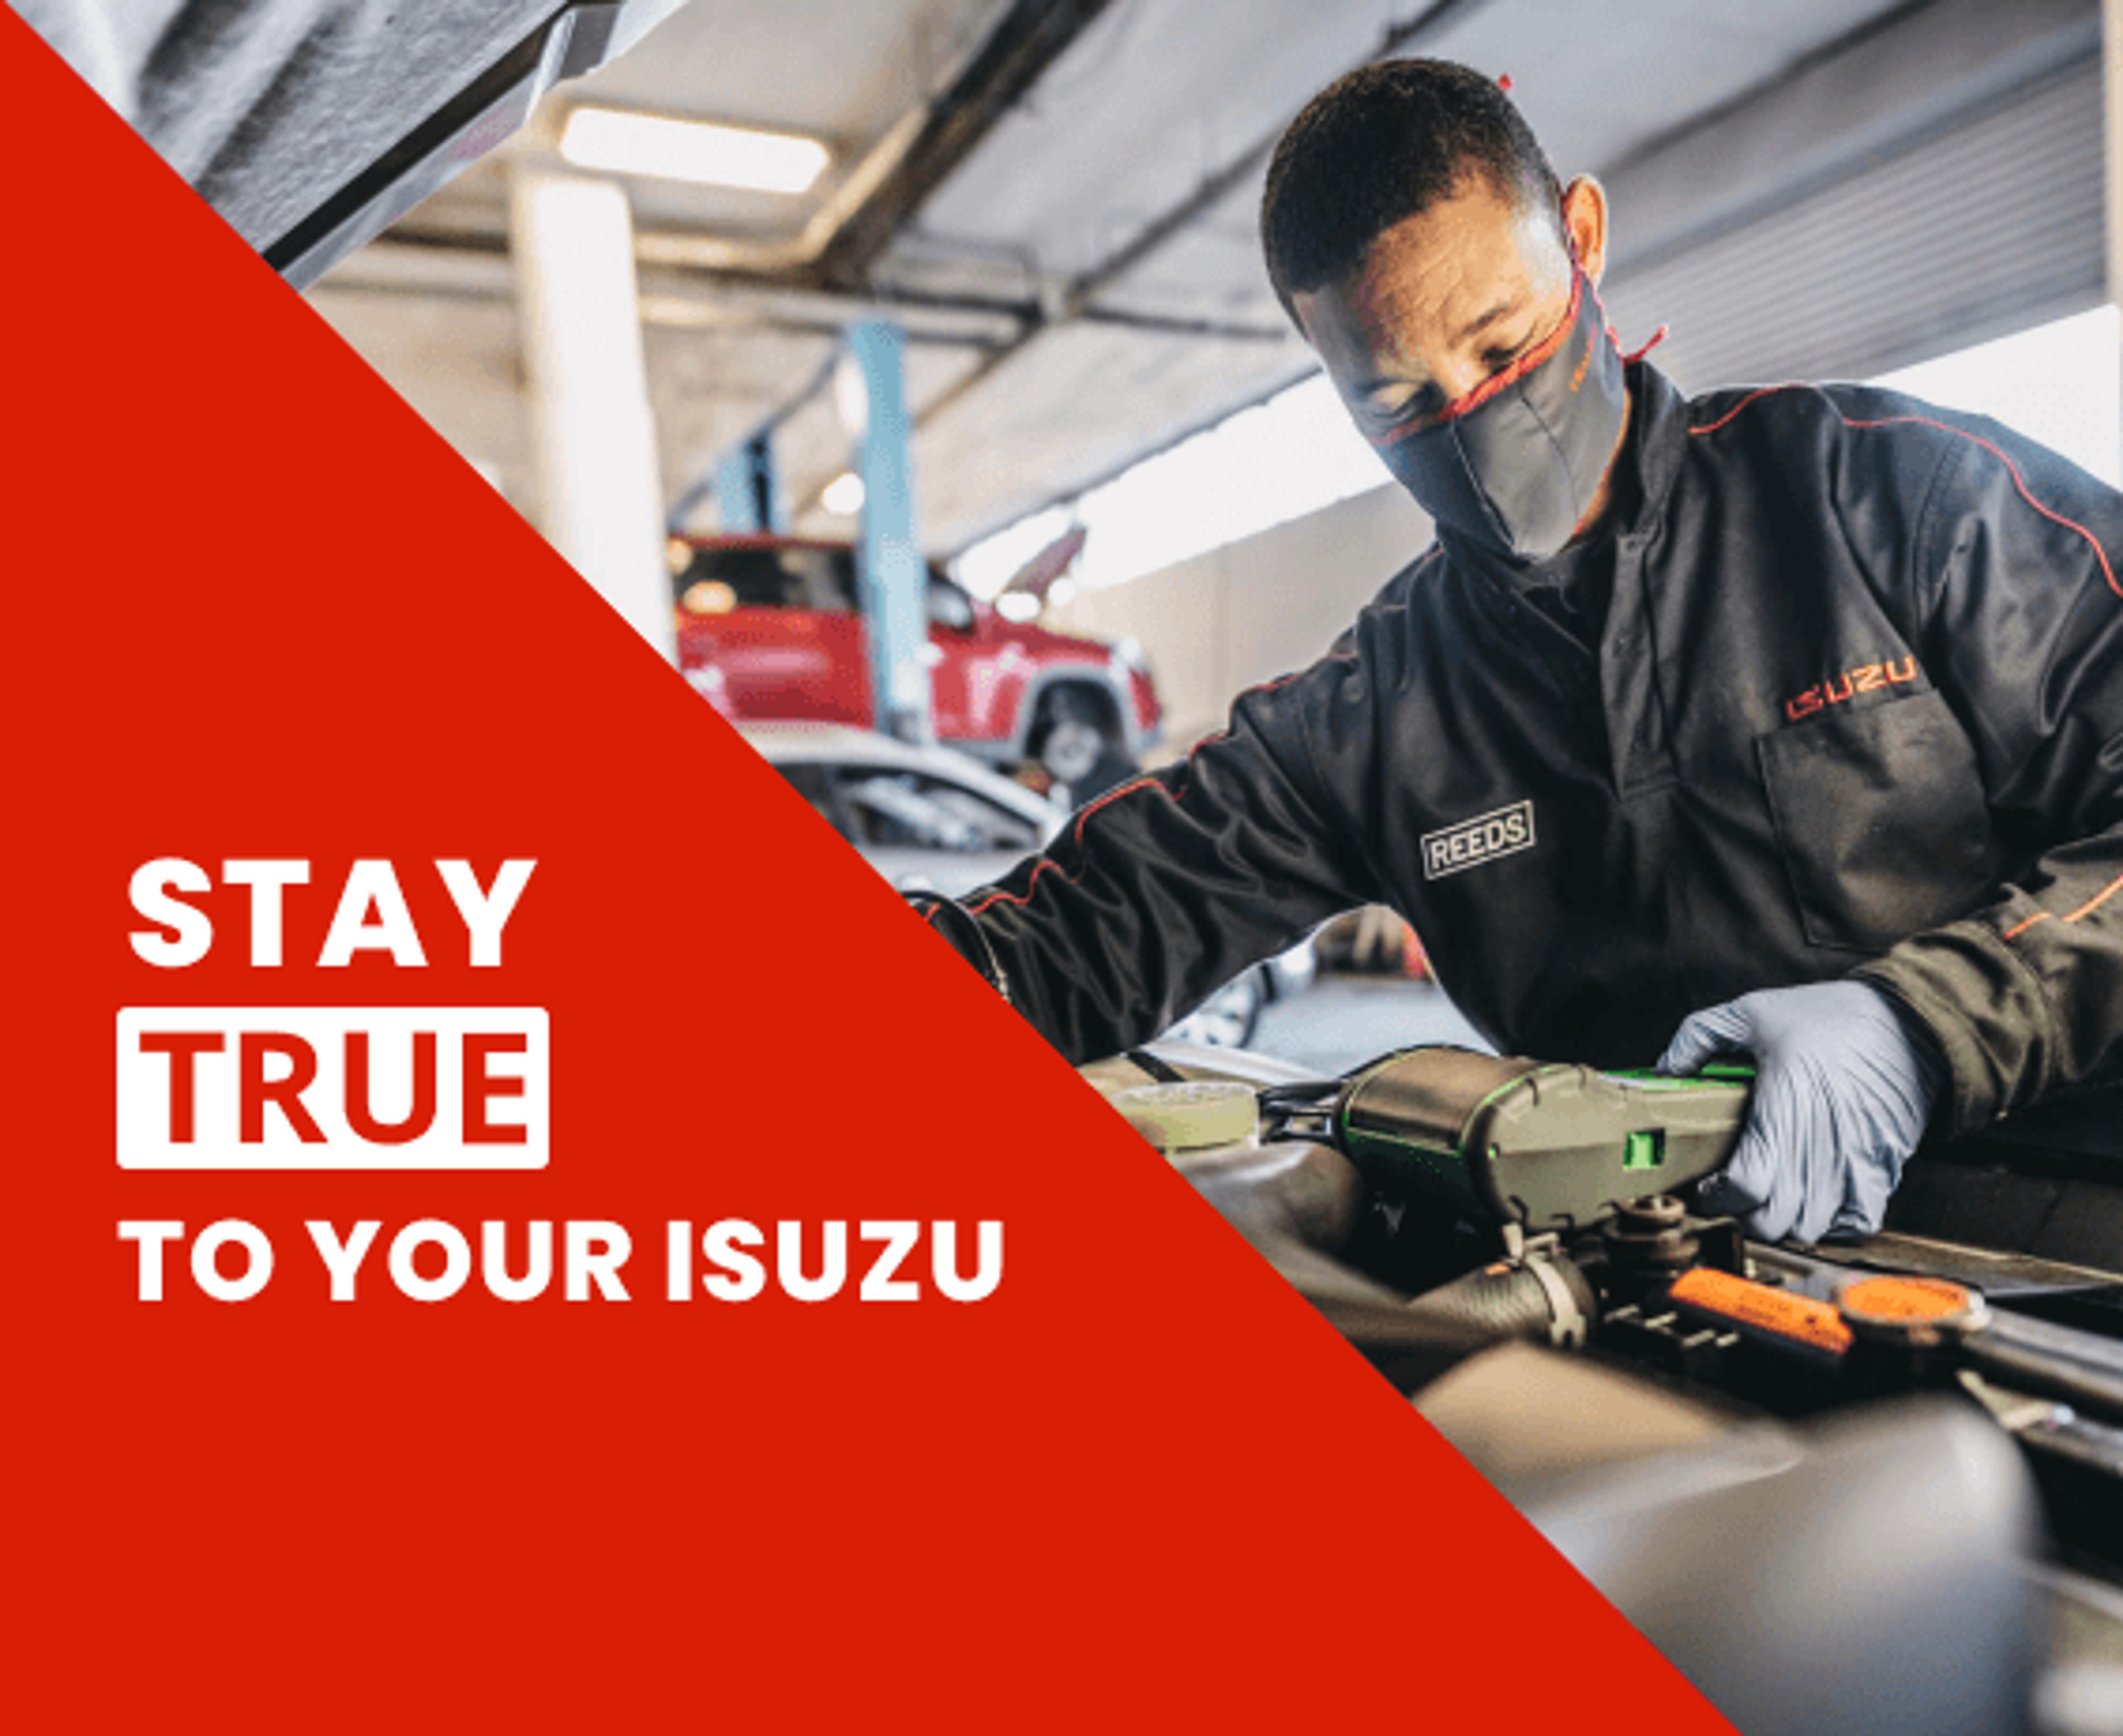 Stay True to your ISUZU service, Book a service now.